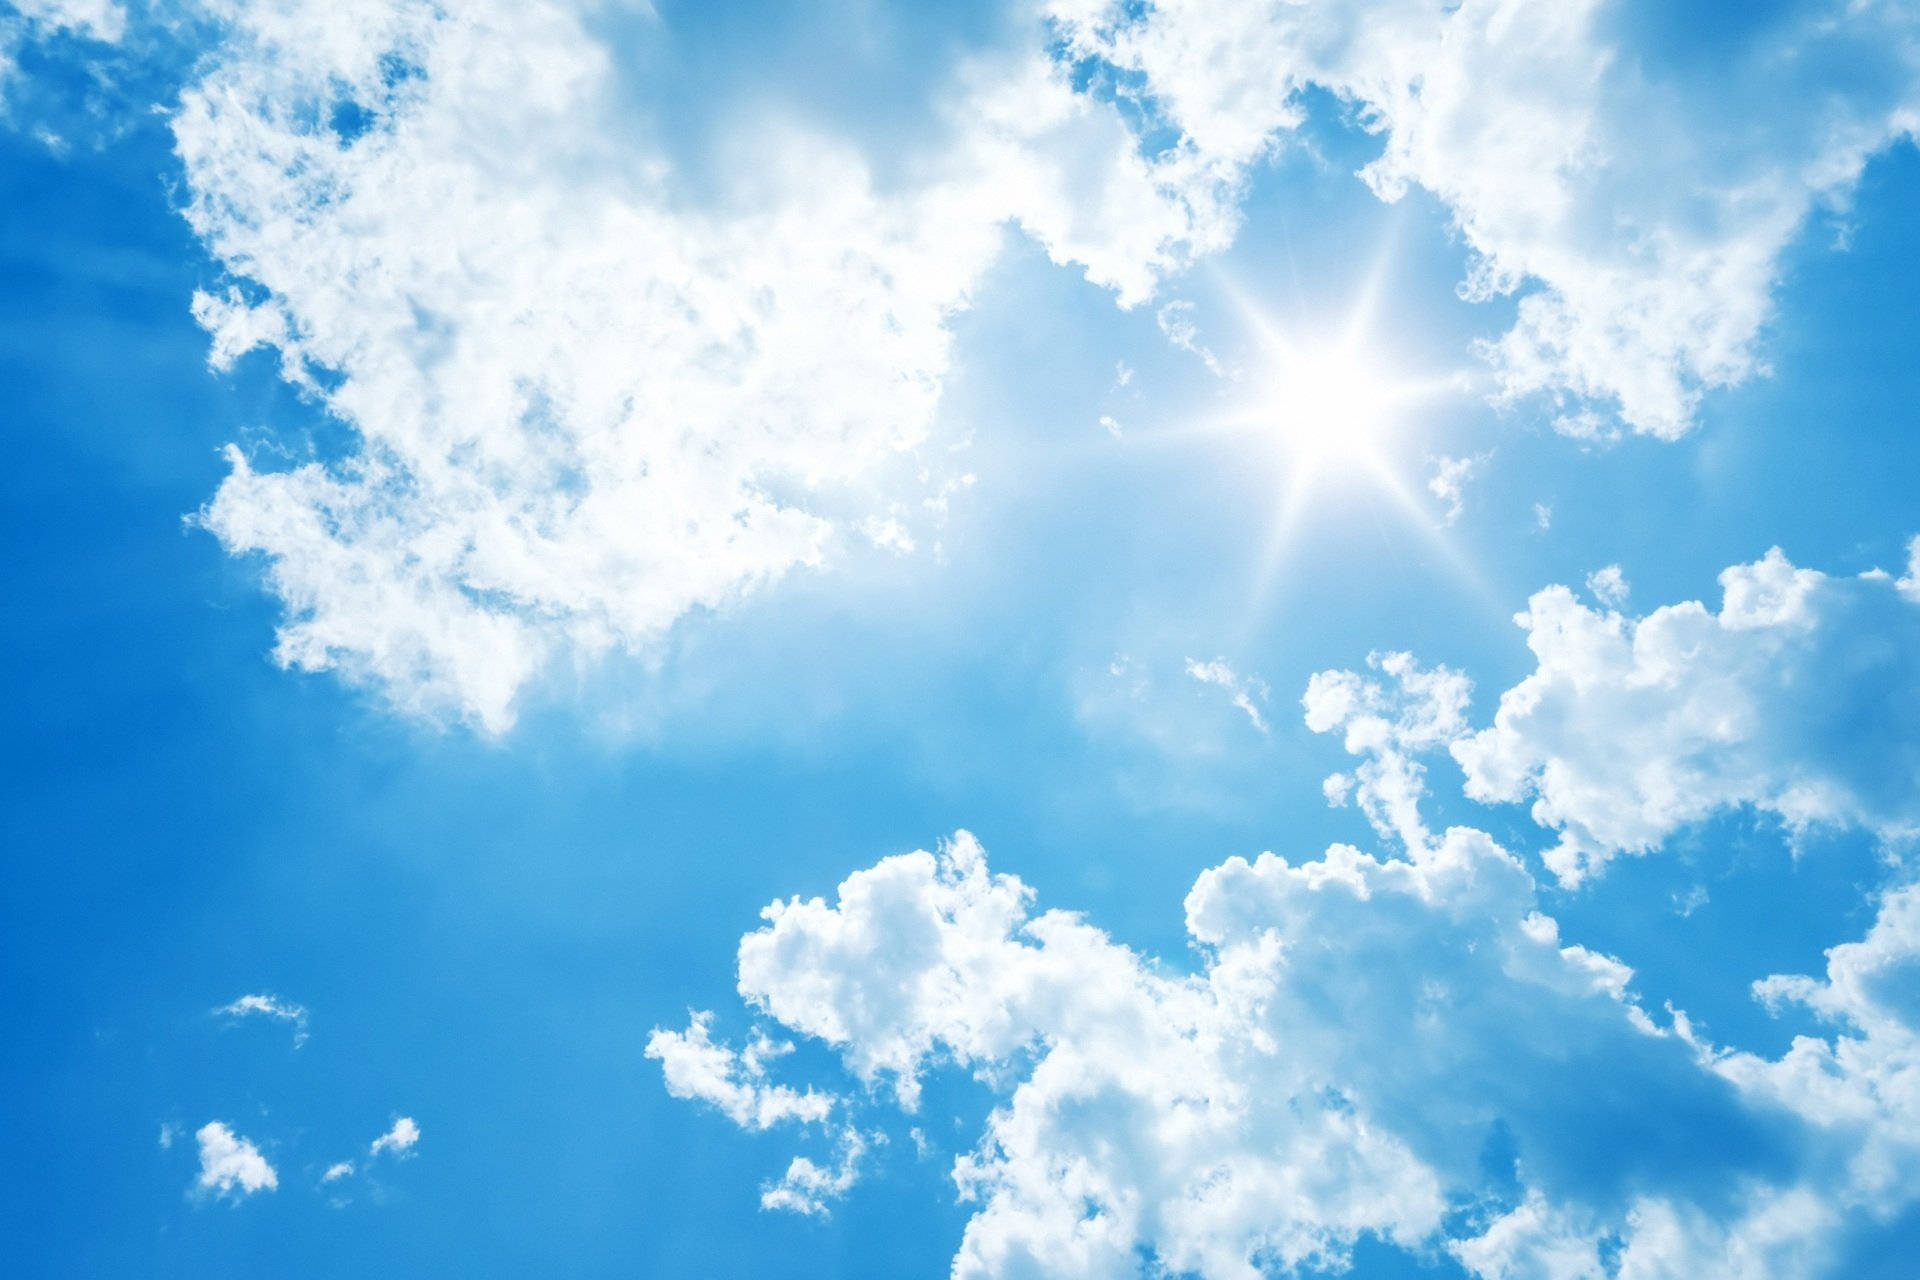 Sunny Funeral Clouds Background